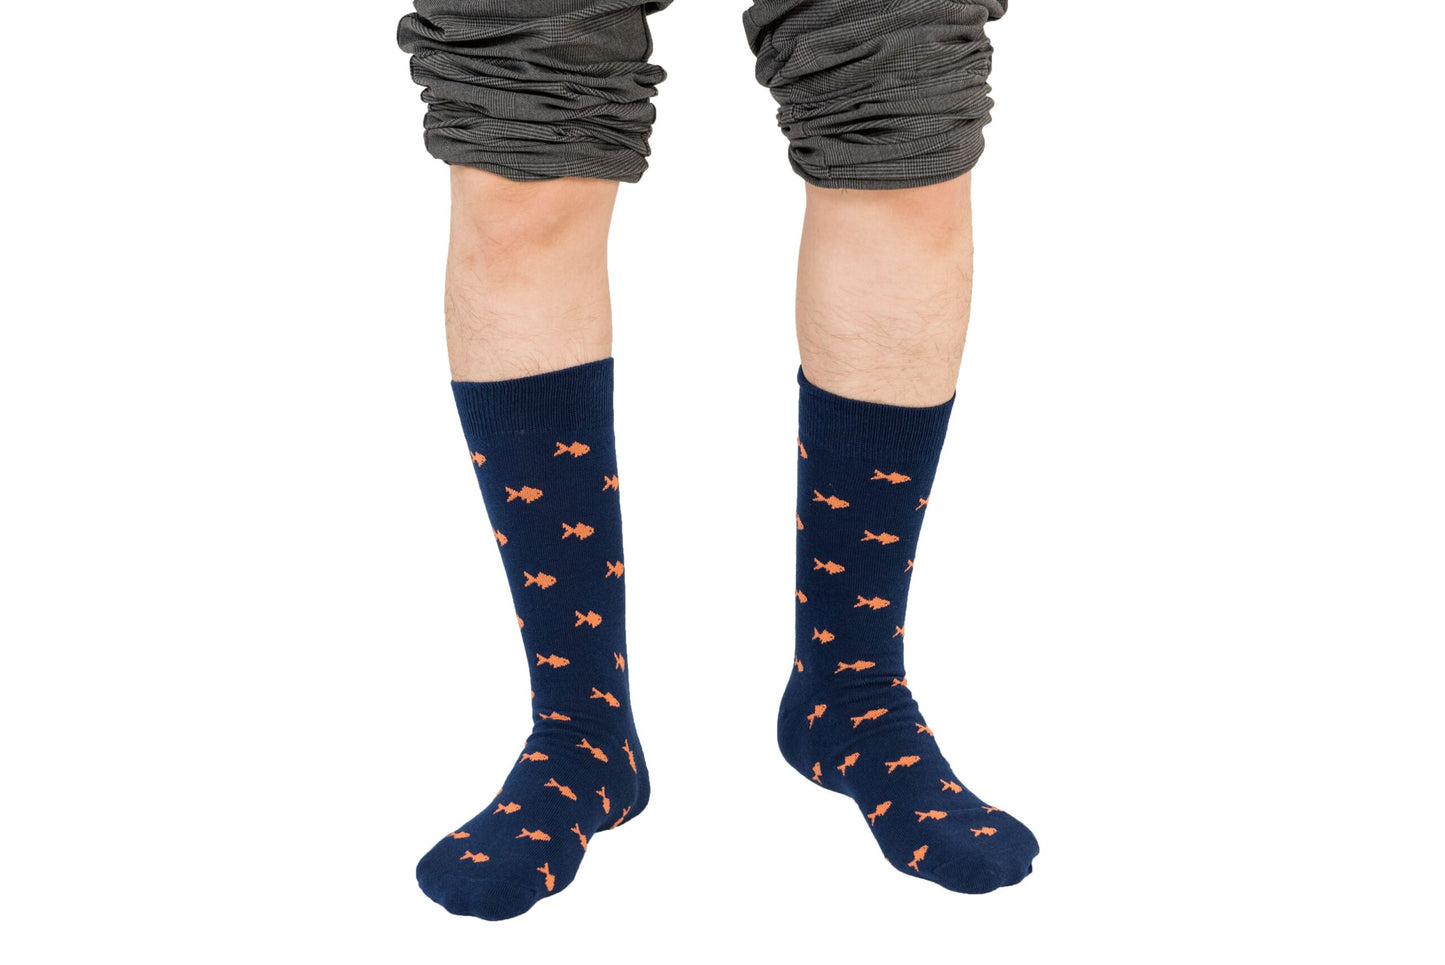 A boy wearing a pair of Gold Fish Socks with orange stars on them.